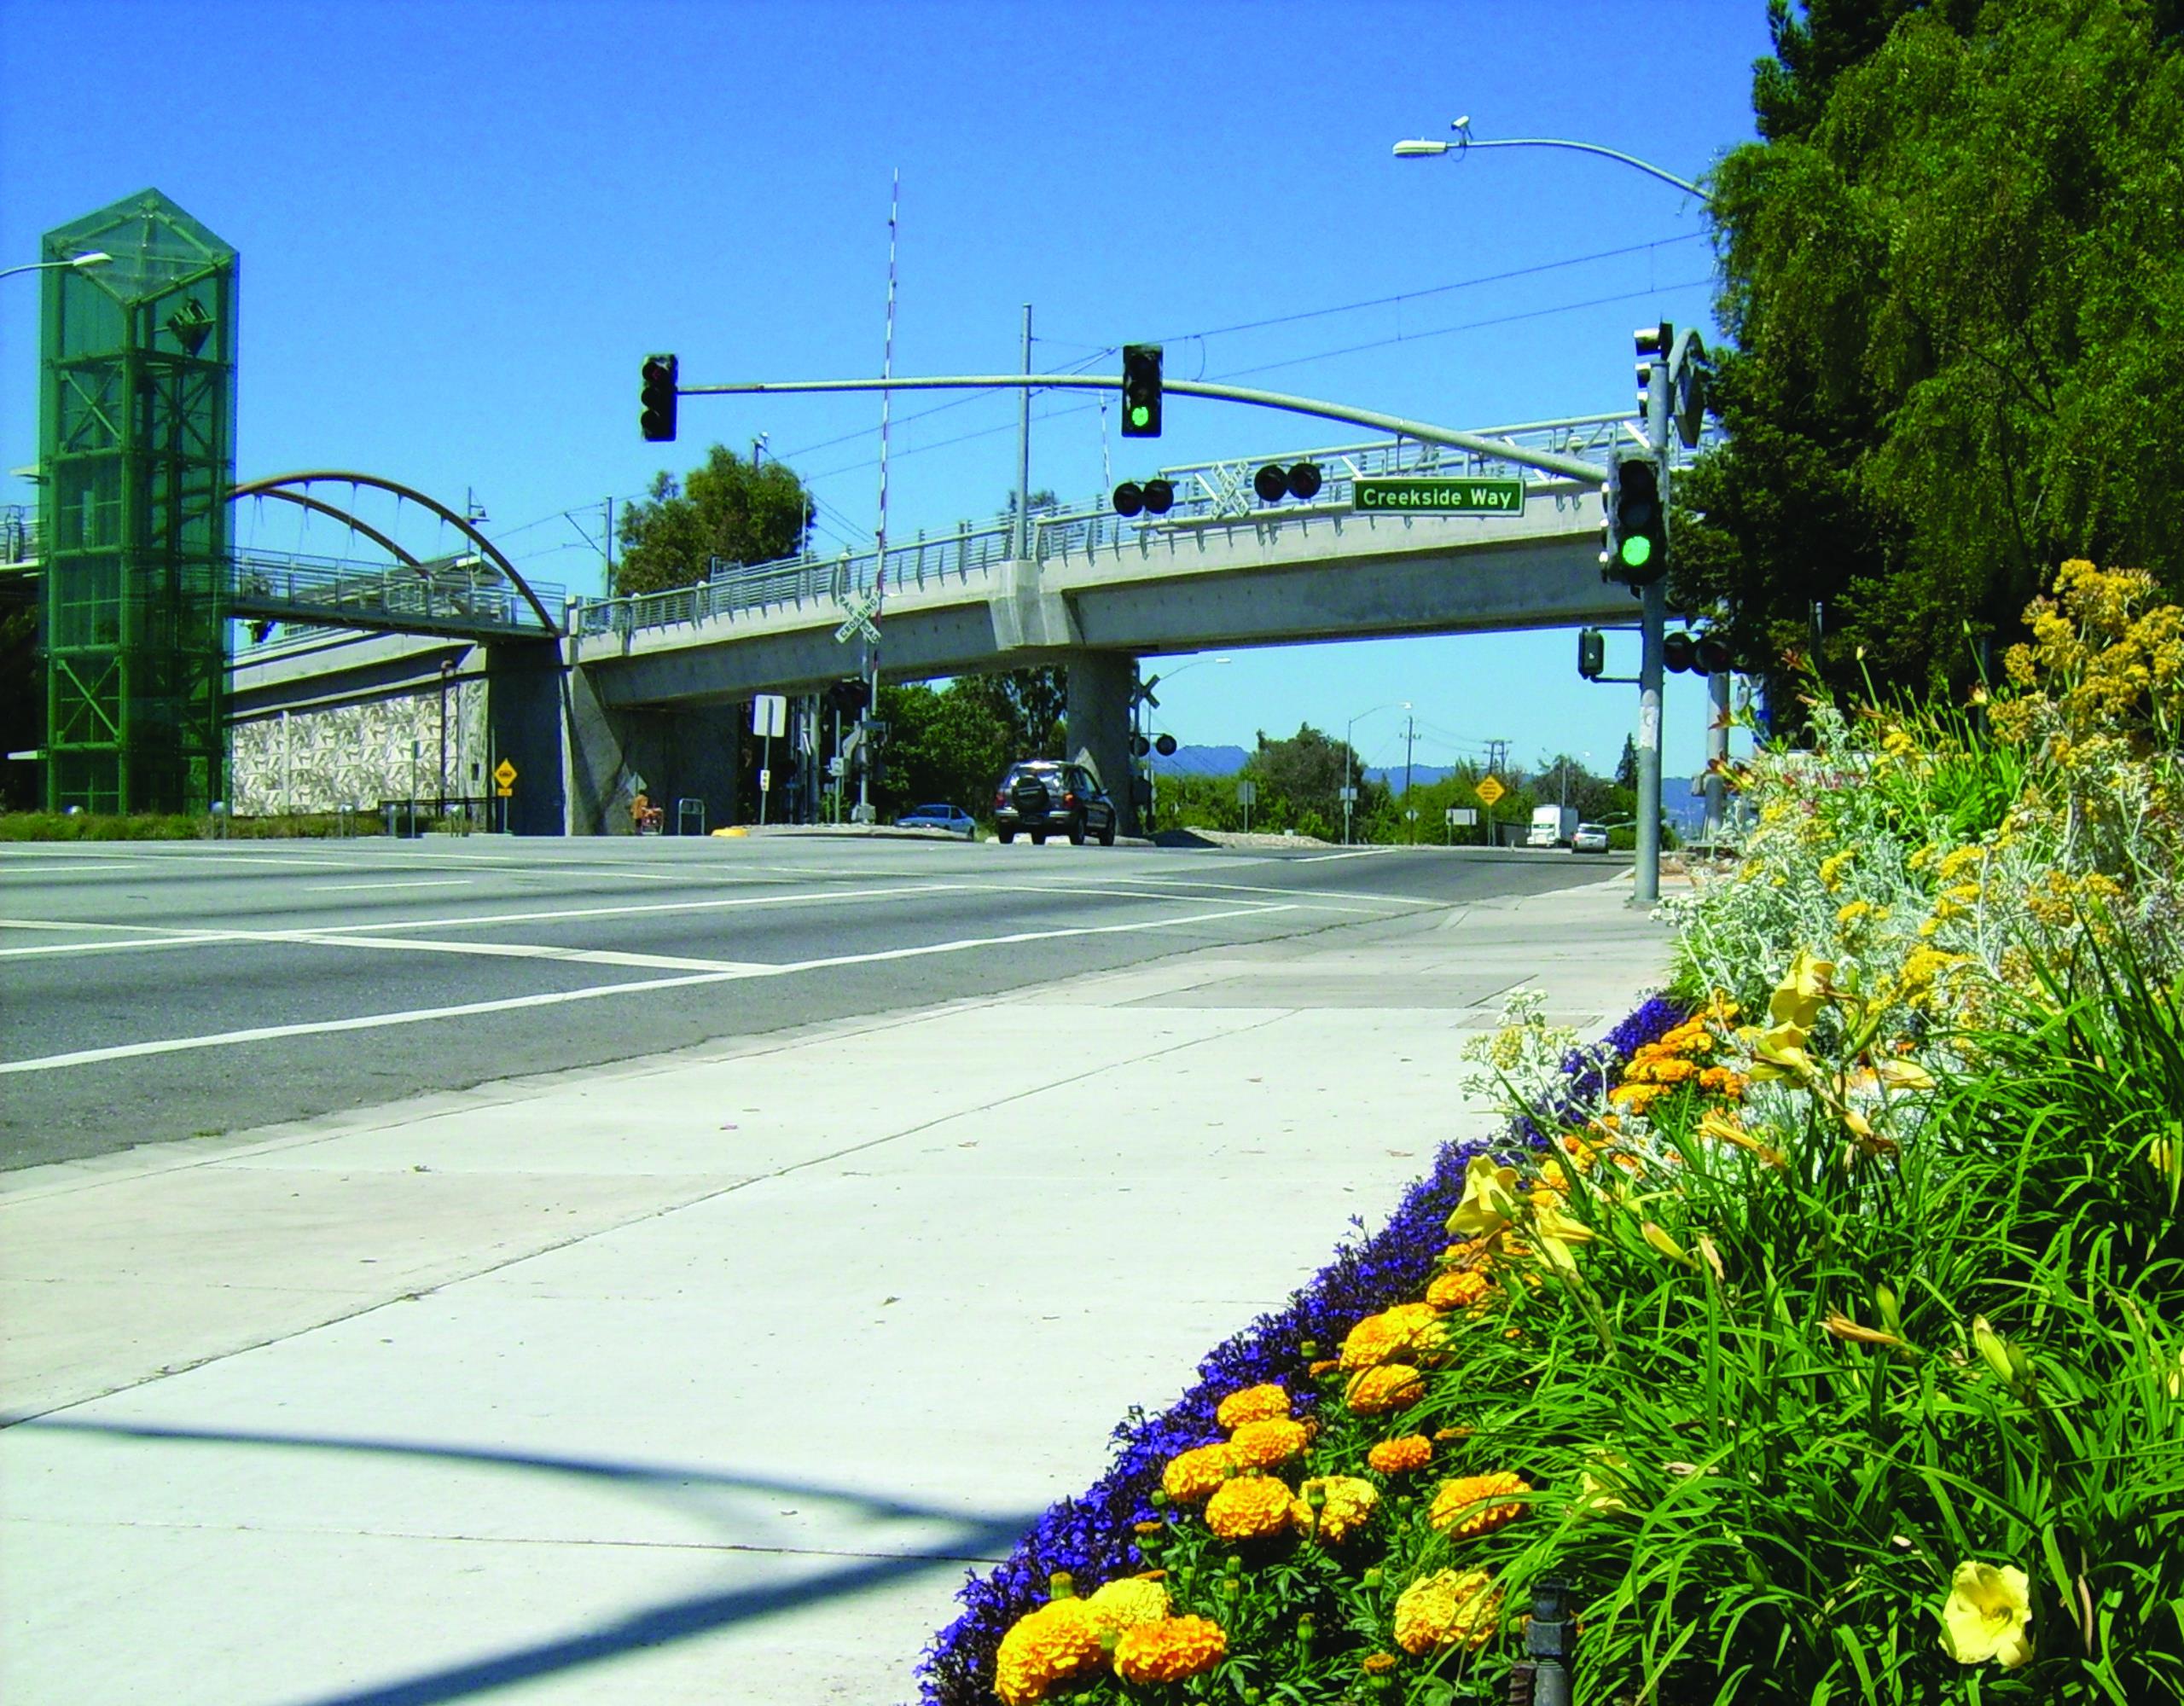 Shot of a bridge with flower beds in the foreground